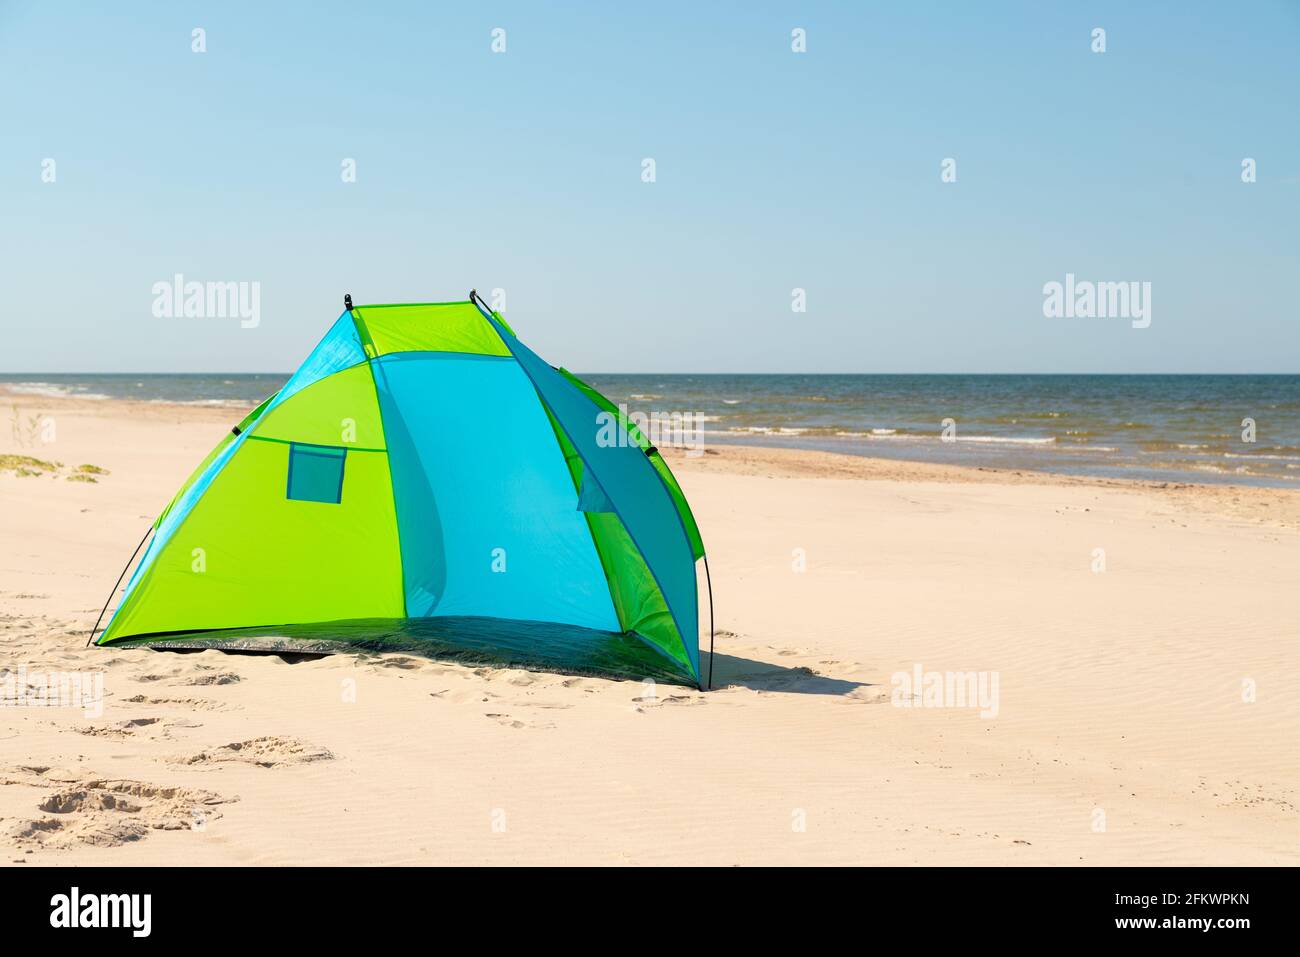 Wind Protection Beach High Resolution Stock Photography and Images - Alamy